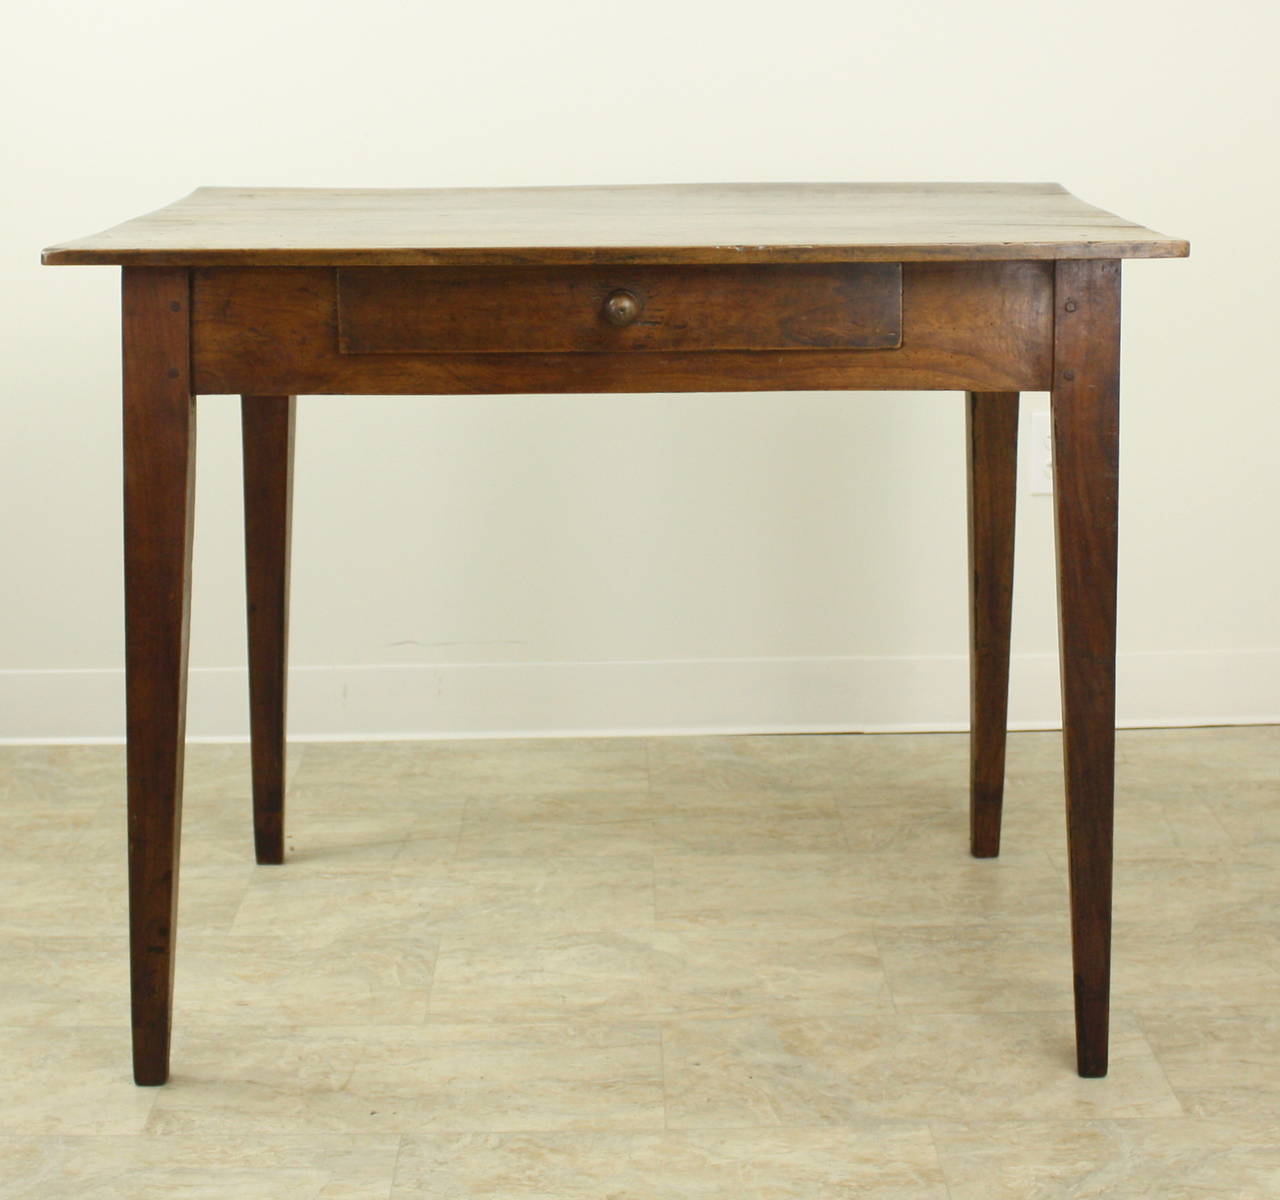 An elegant smaller writing table or desk with tapered legs and a good apron height for knees at 25